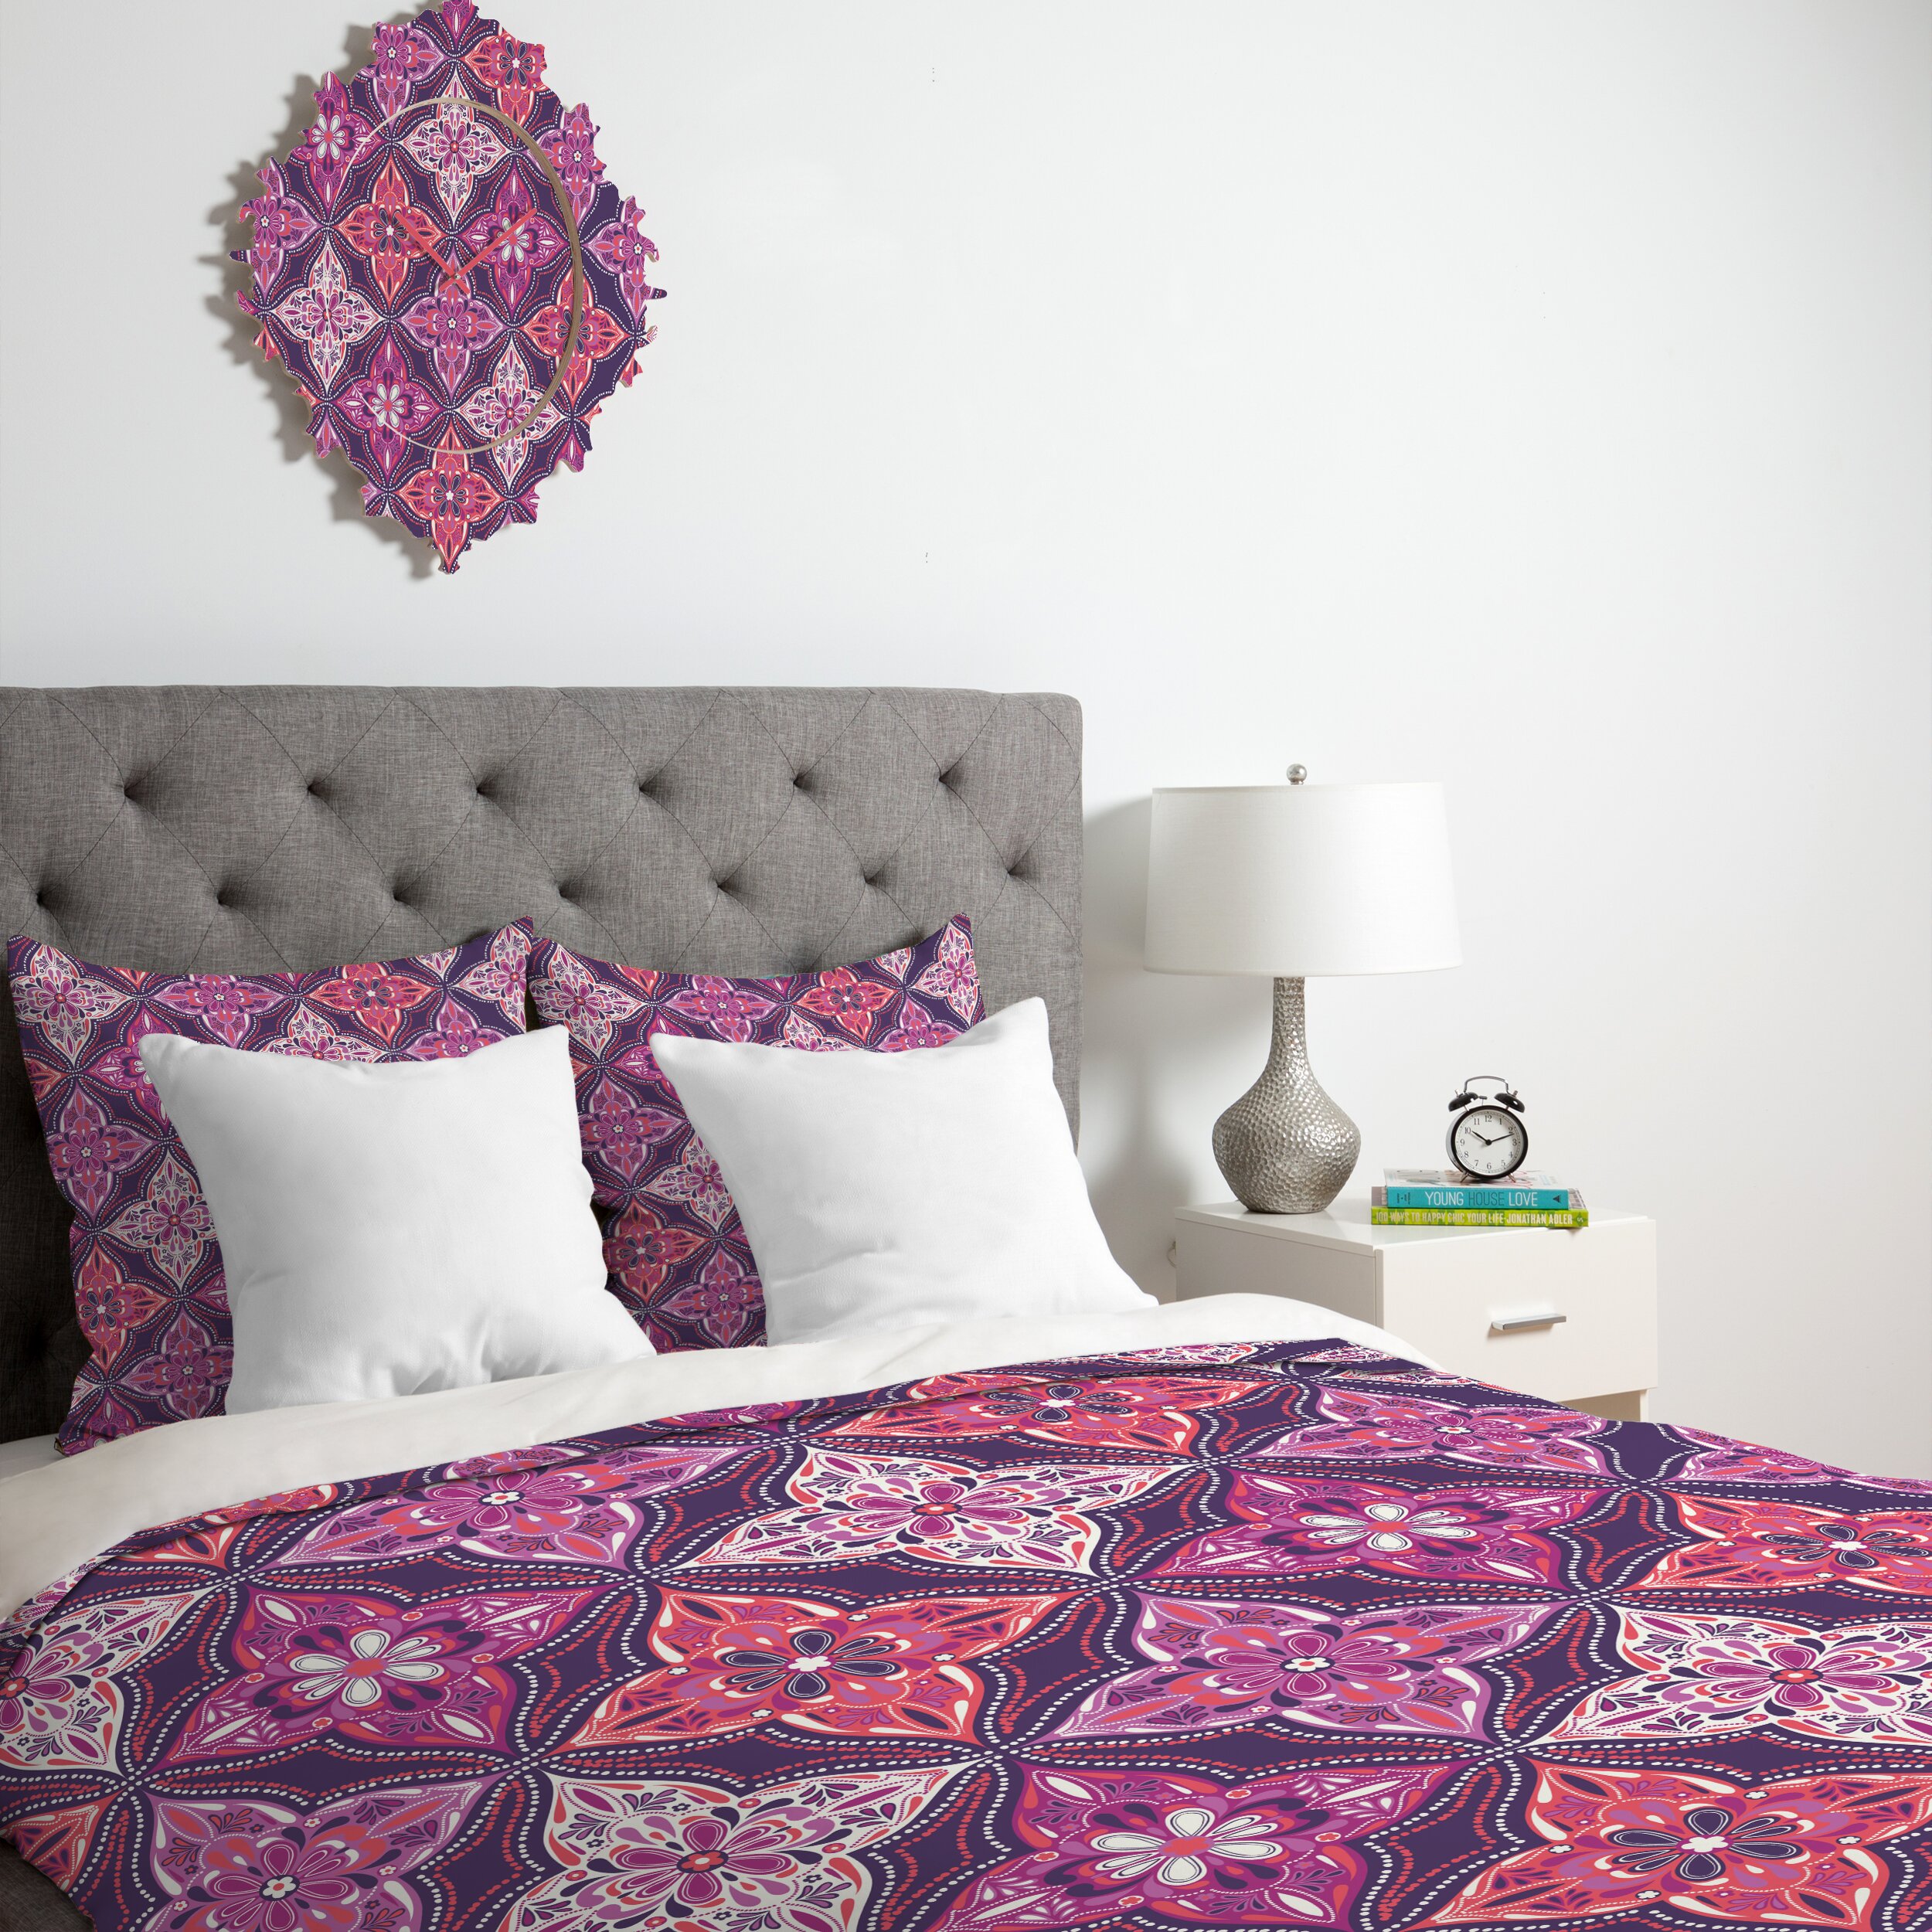 DENY Designs Khristian A Howell Provencal Lavender 5 Duvet Cover Collection & Reviews Wayfair